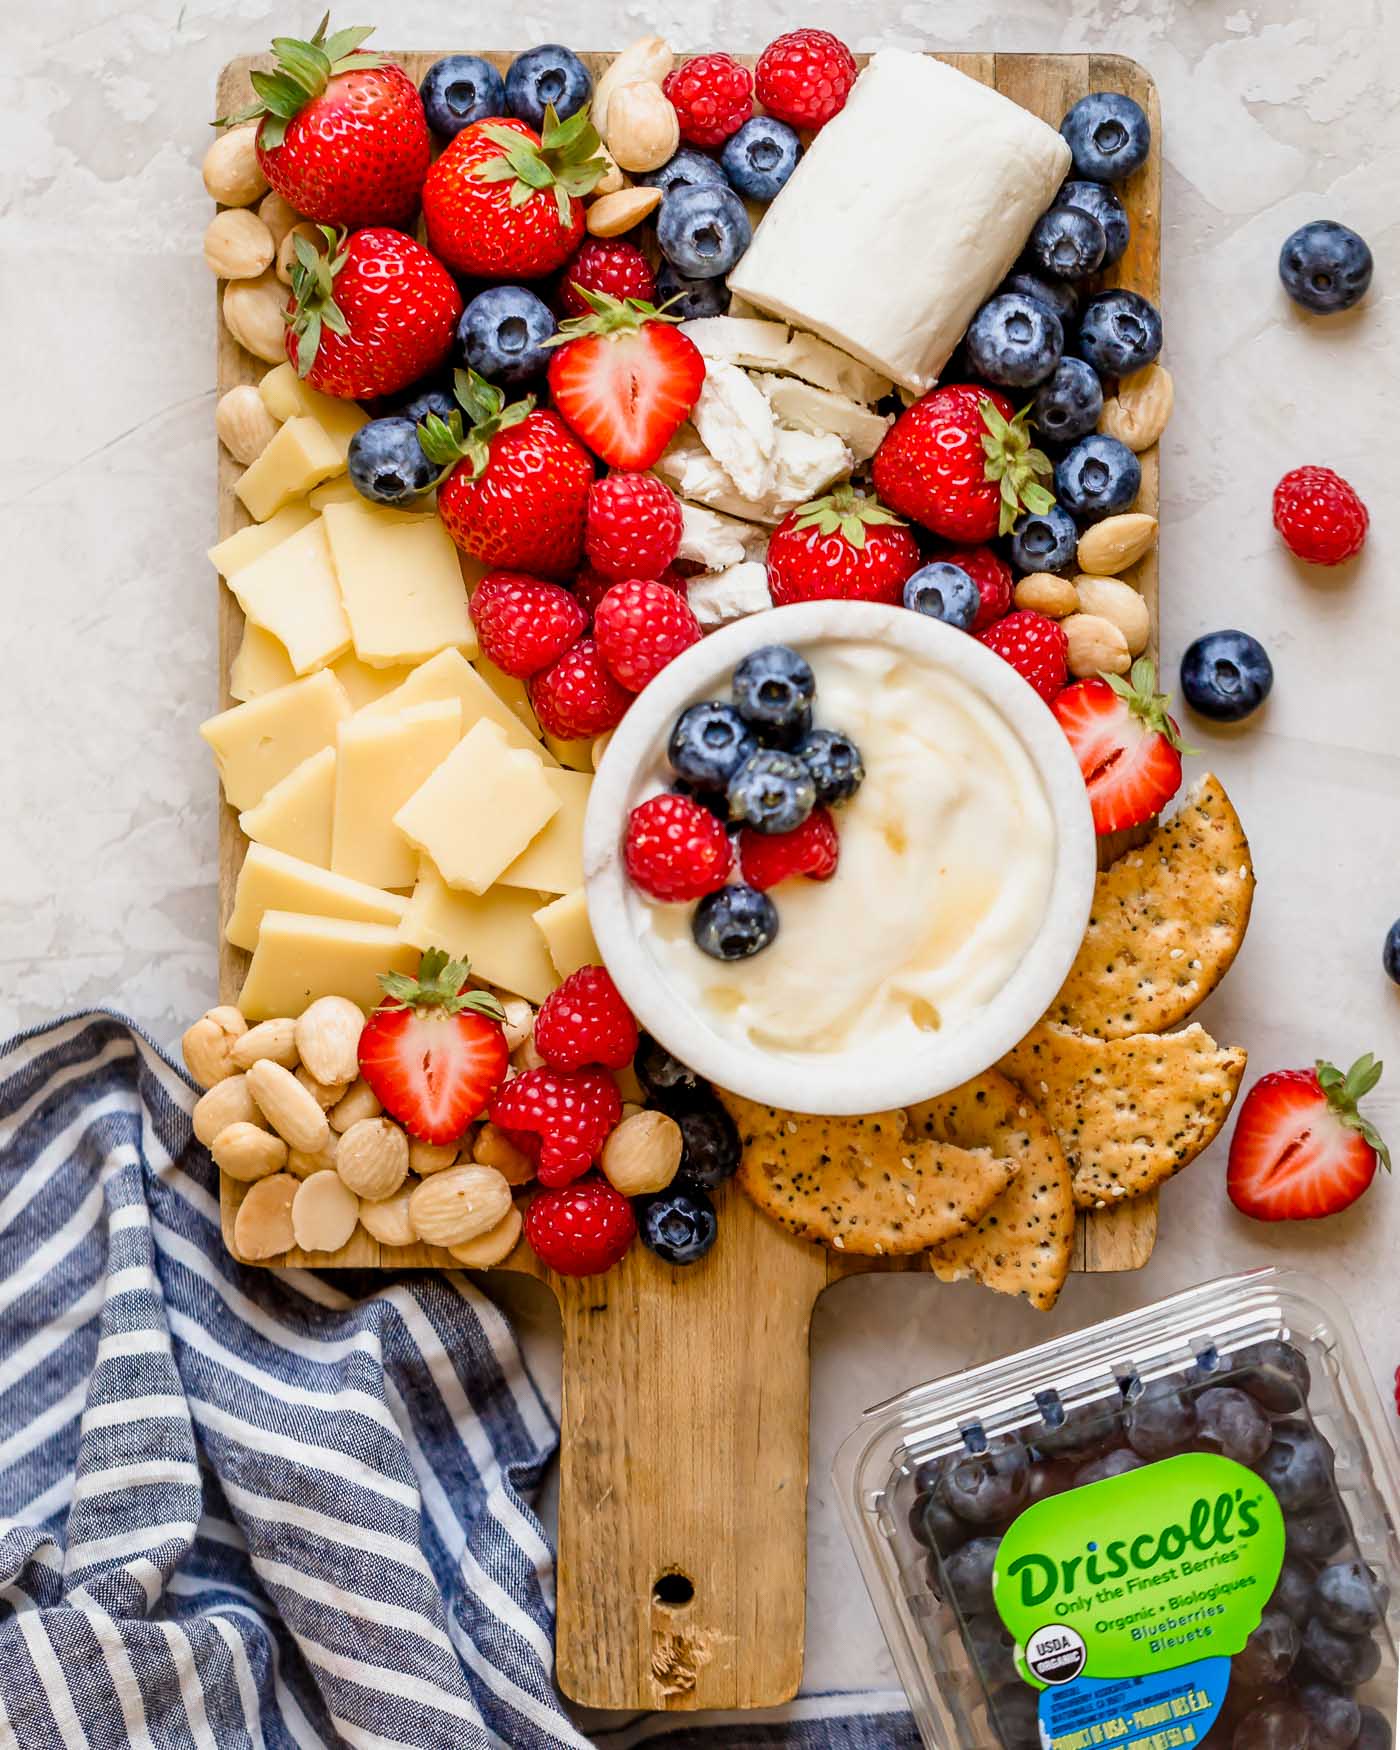 a summer berry cheese board filled with strawberries, raspberries, blueberries, & the perfect cheeses to pair with cheese boards. this summer berry cheese board is an easy & fun appetizer or snack to serve at parties & barbeques all summer long! #playswellwithbutter #summerberrycheeseboard #cheeseboard #summercheeseboard #cheeseboardidea #appetizer #appetizersforparty #easyappetizers #makeaheadappetizers